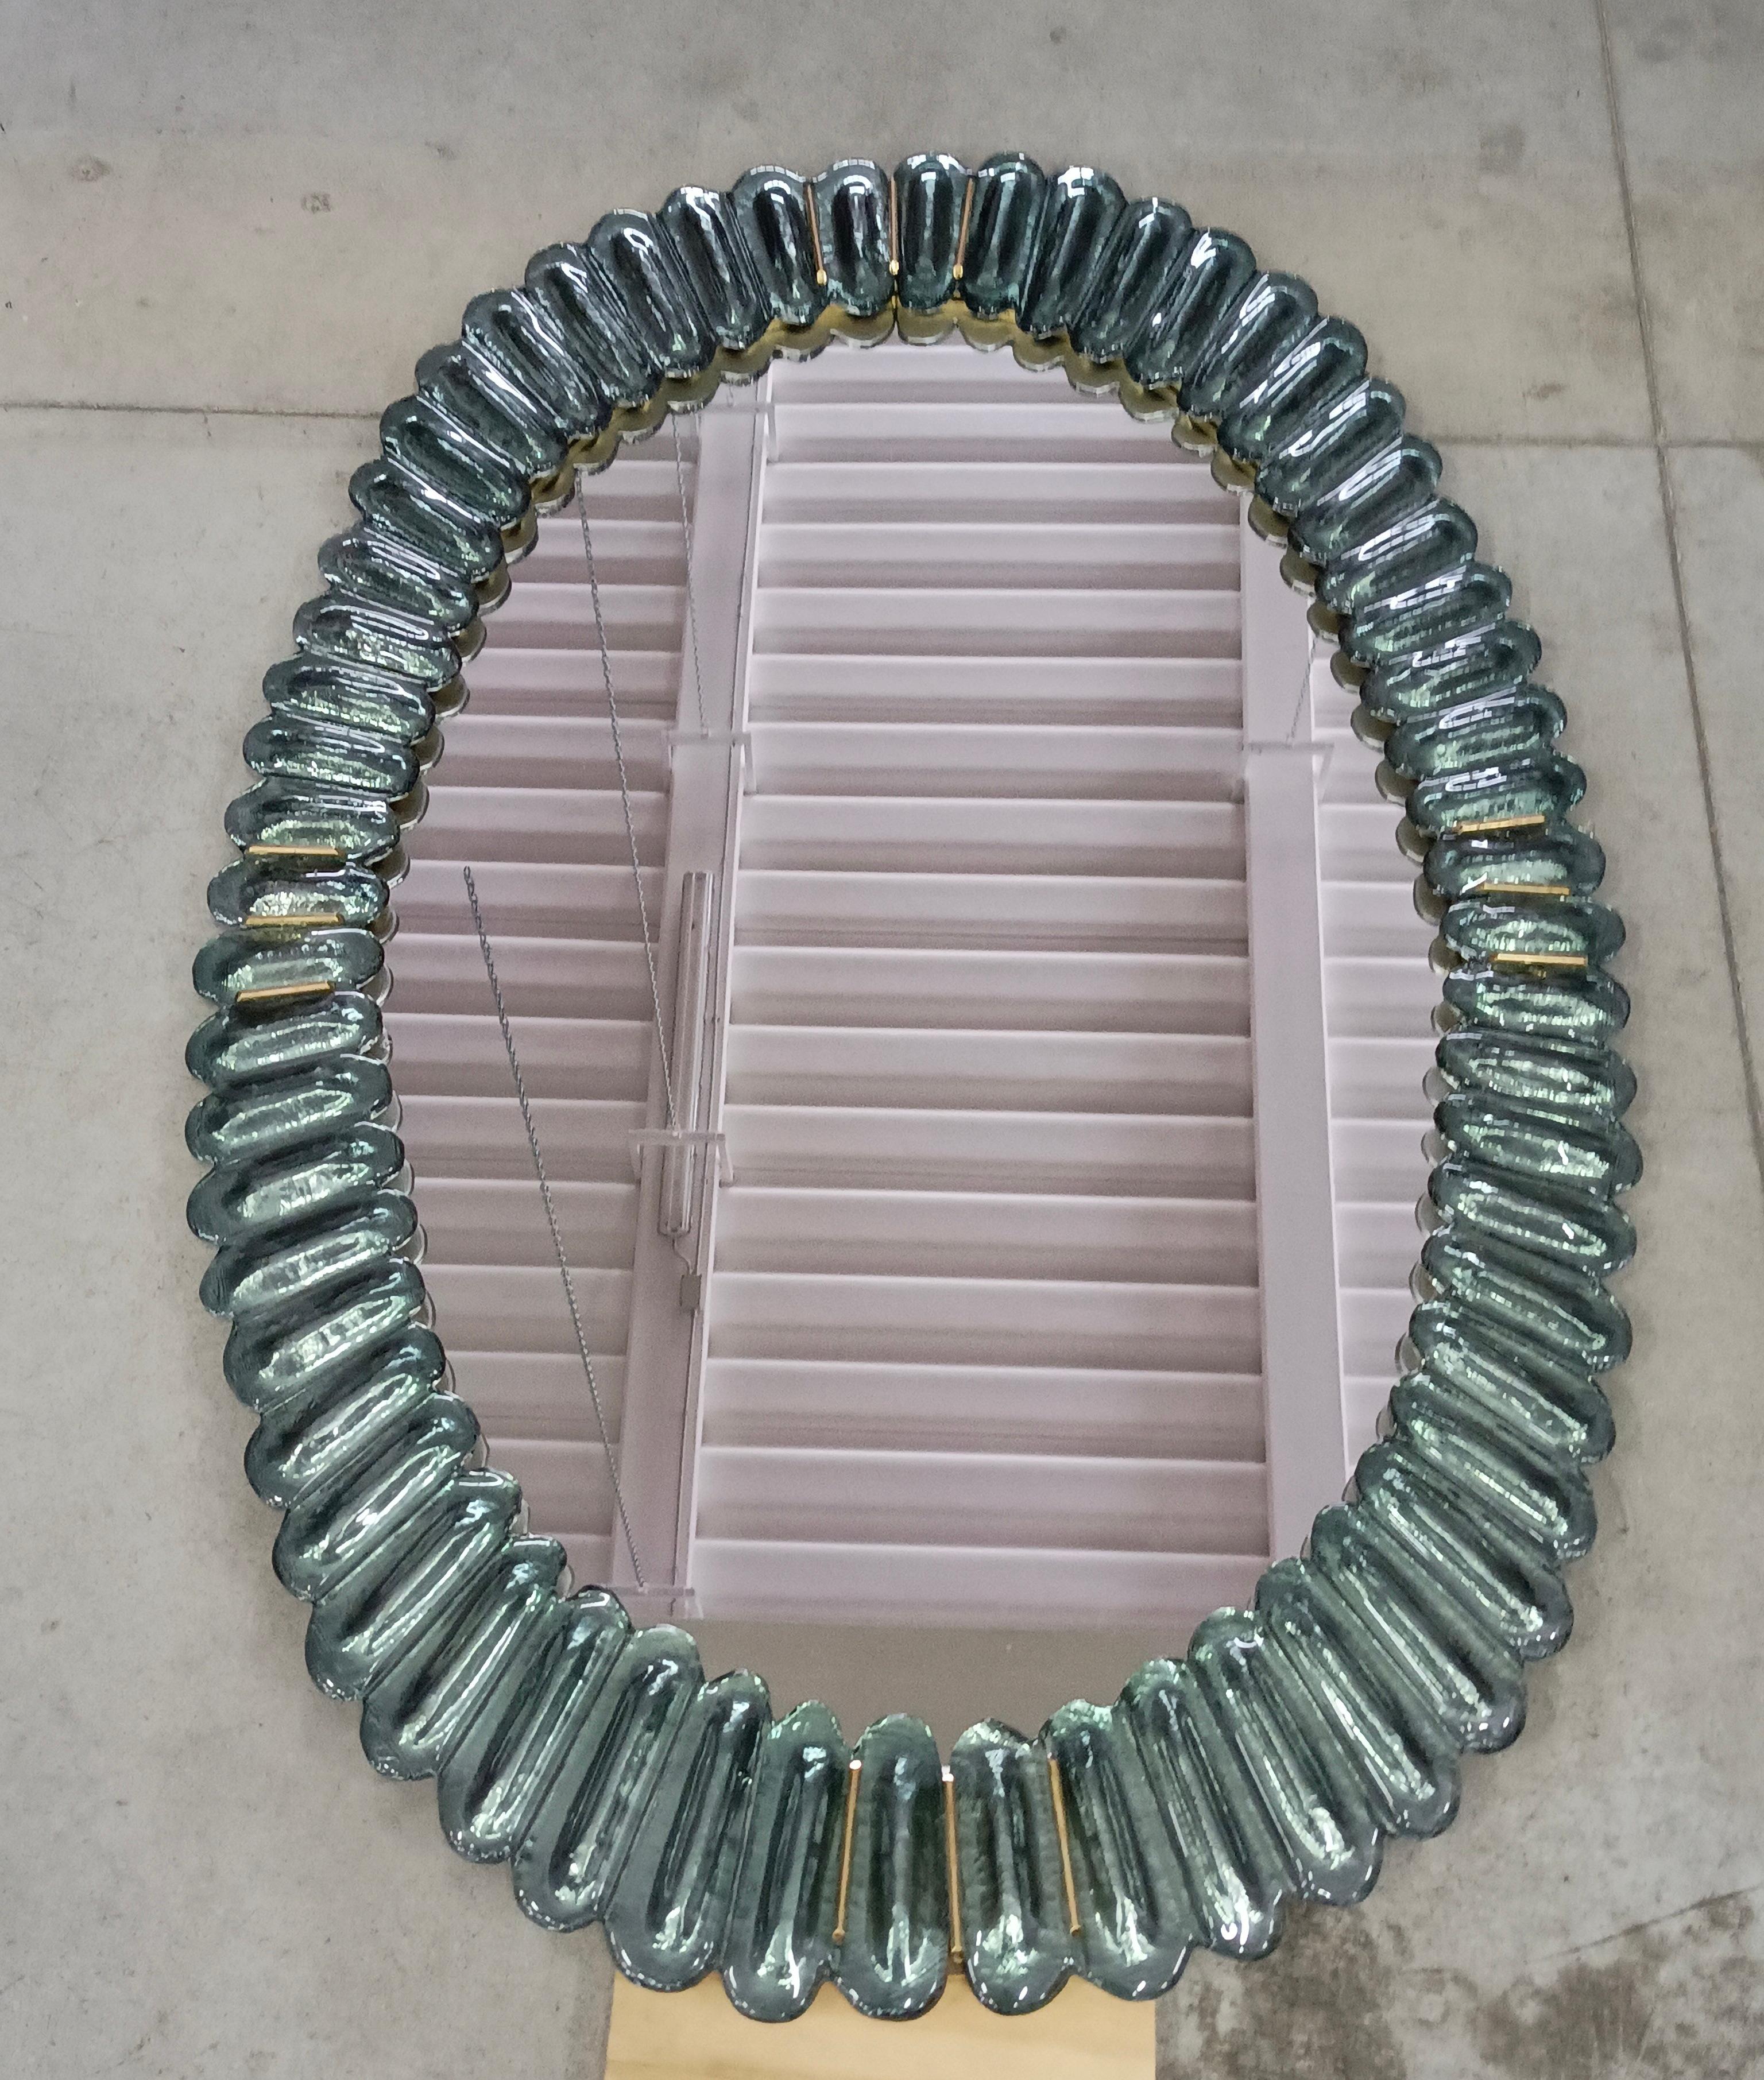 Stunning mirror in blazing Green Aquamarine color Murano glass, Venice. A mirror that alone will furnish your home environment.

The mirror has a rear structure in wood, on which four Murano green aquamarine color glass sections are mounted to form